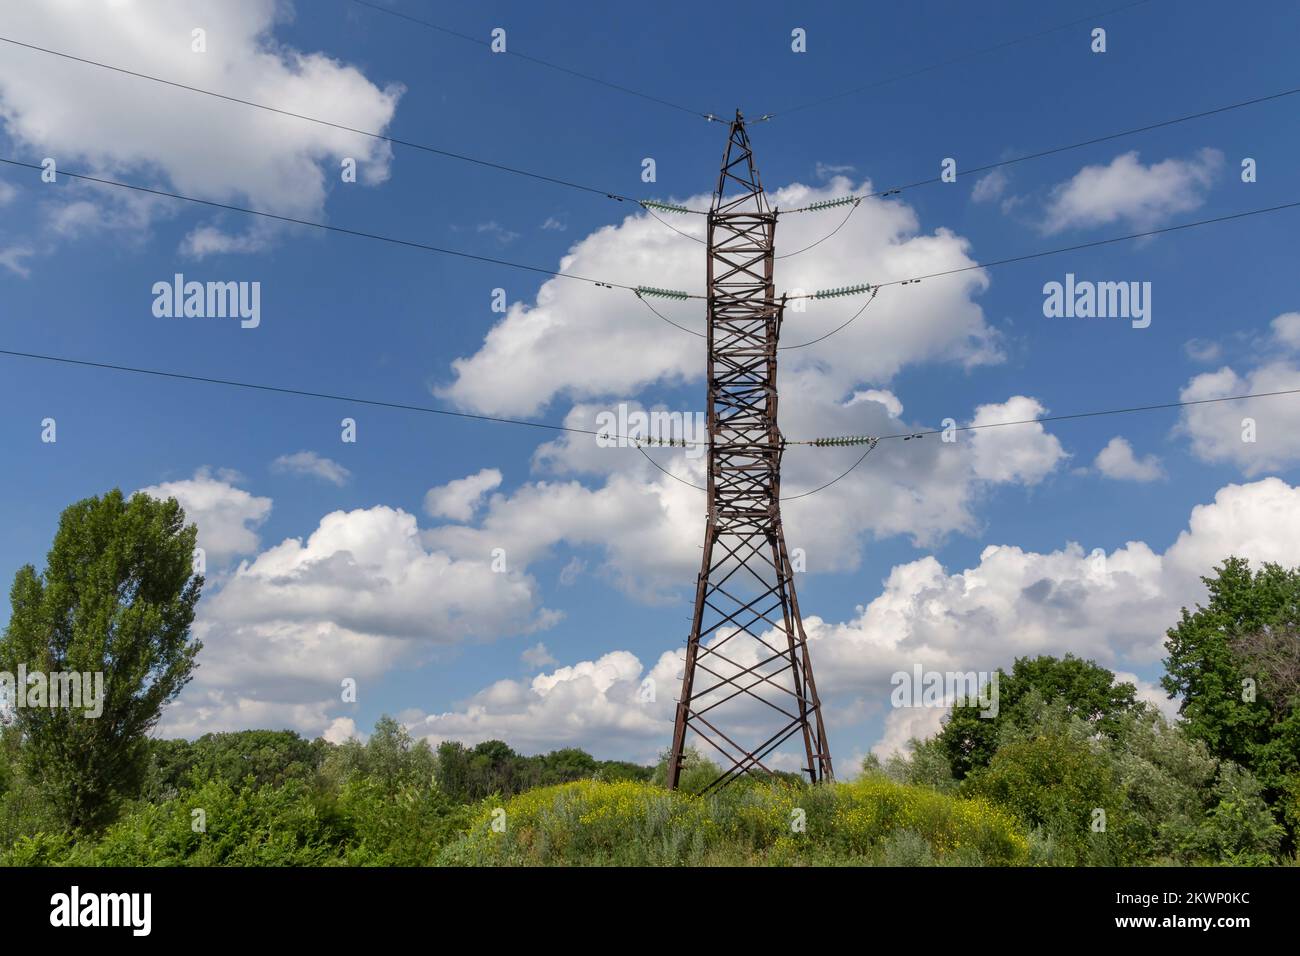 view on electricity pylon against cloudy sky in Ukraine Stock Photo